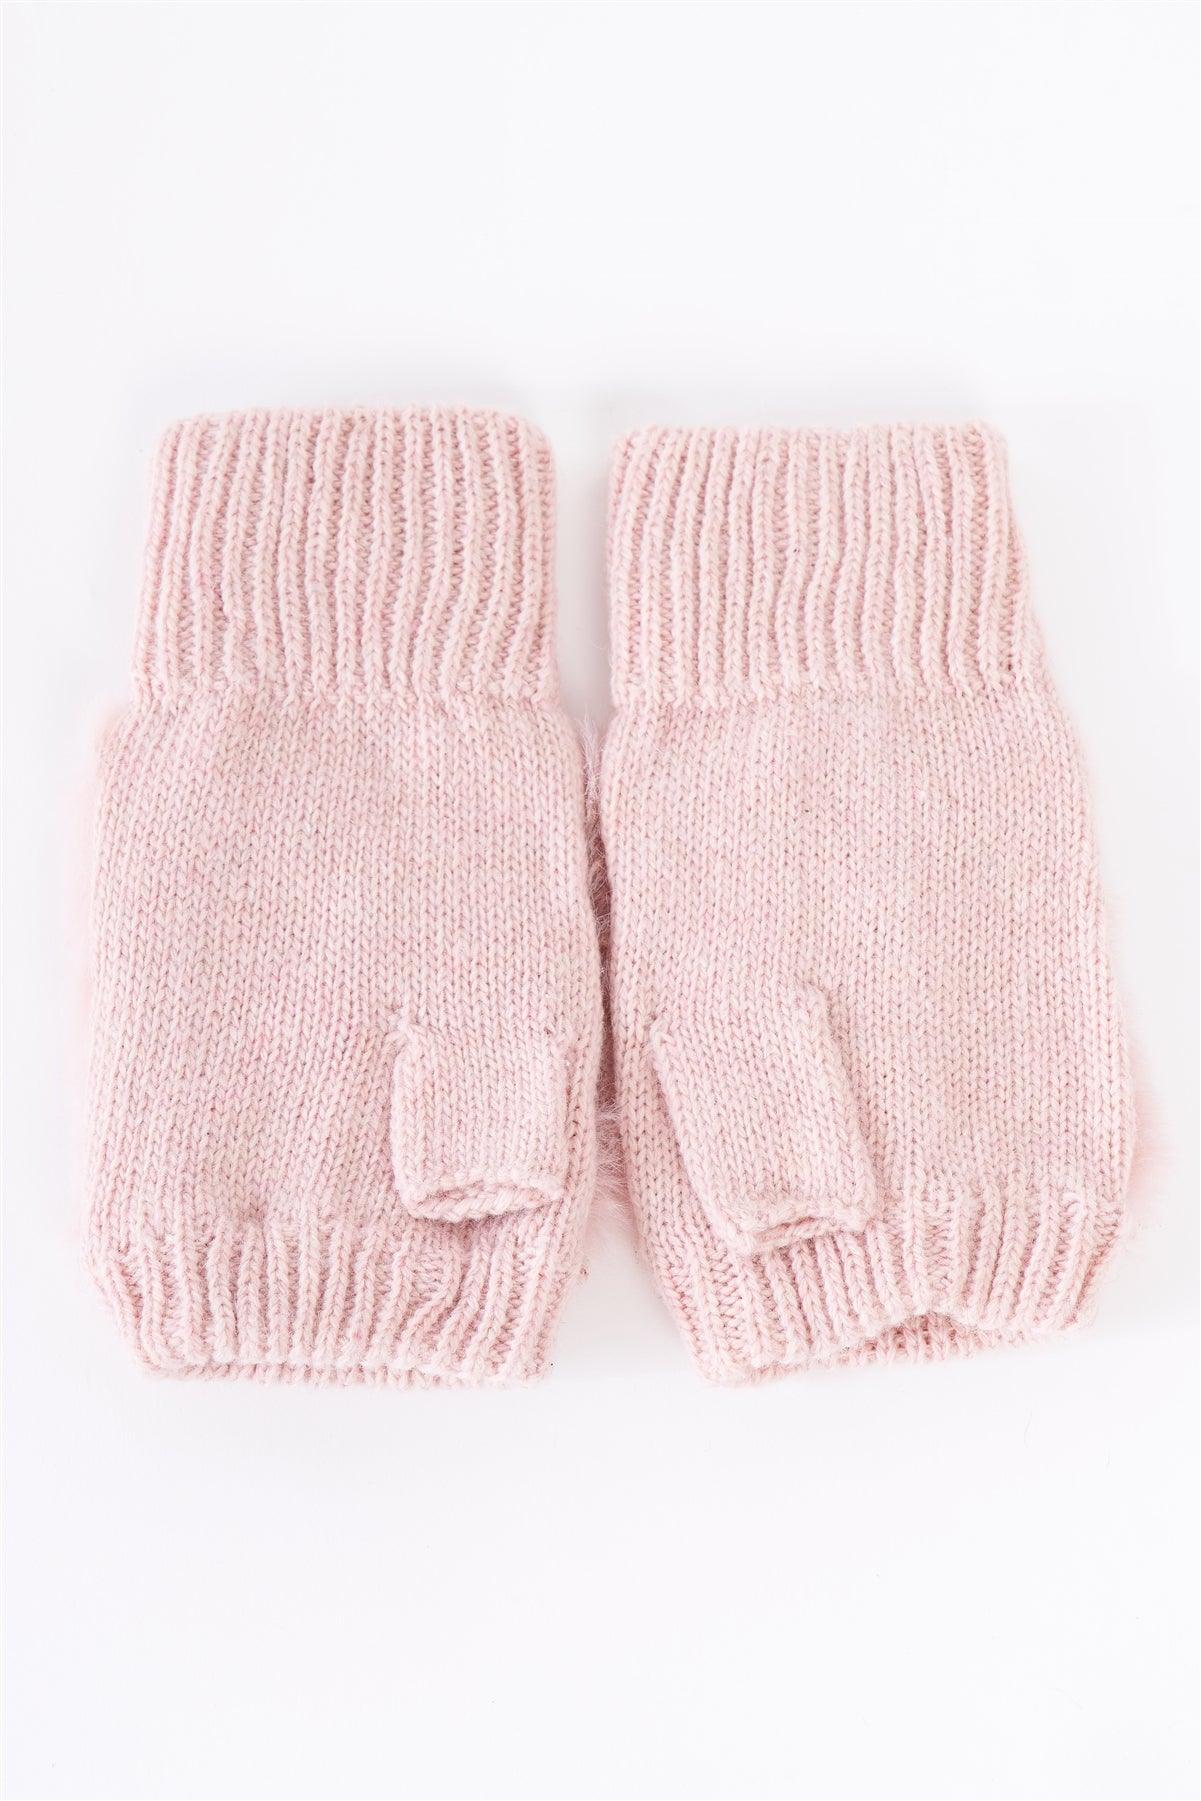 Pink Knit Furry Fingerless Pearl Detail Winter Gloves /3 Pieces